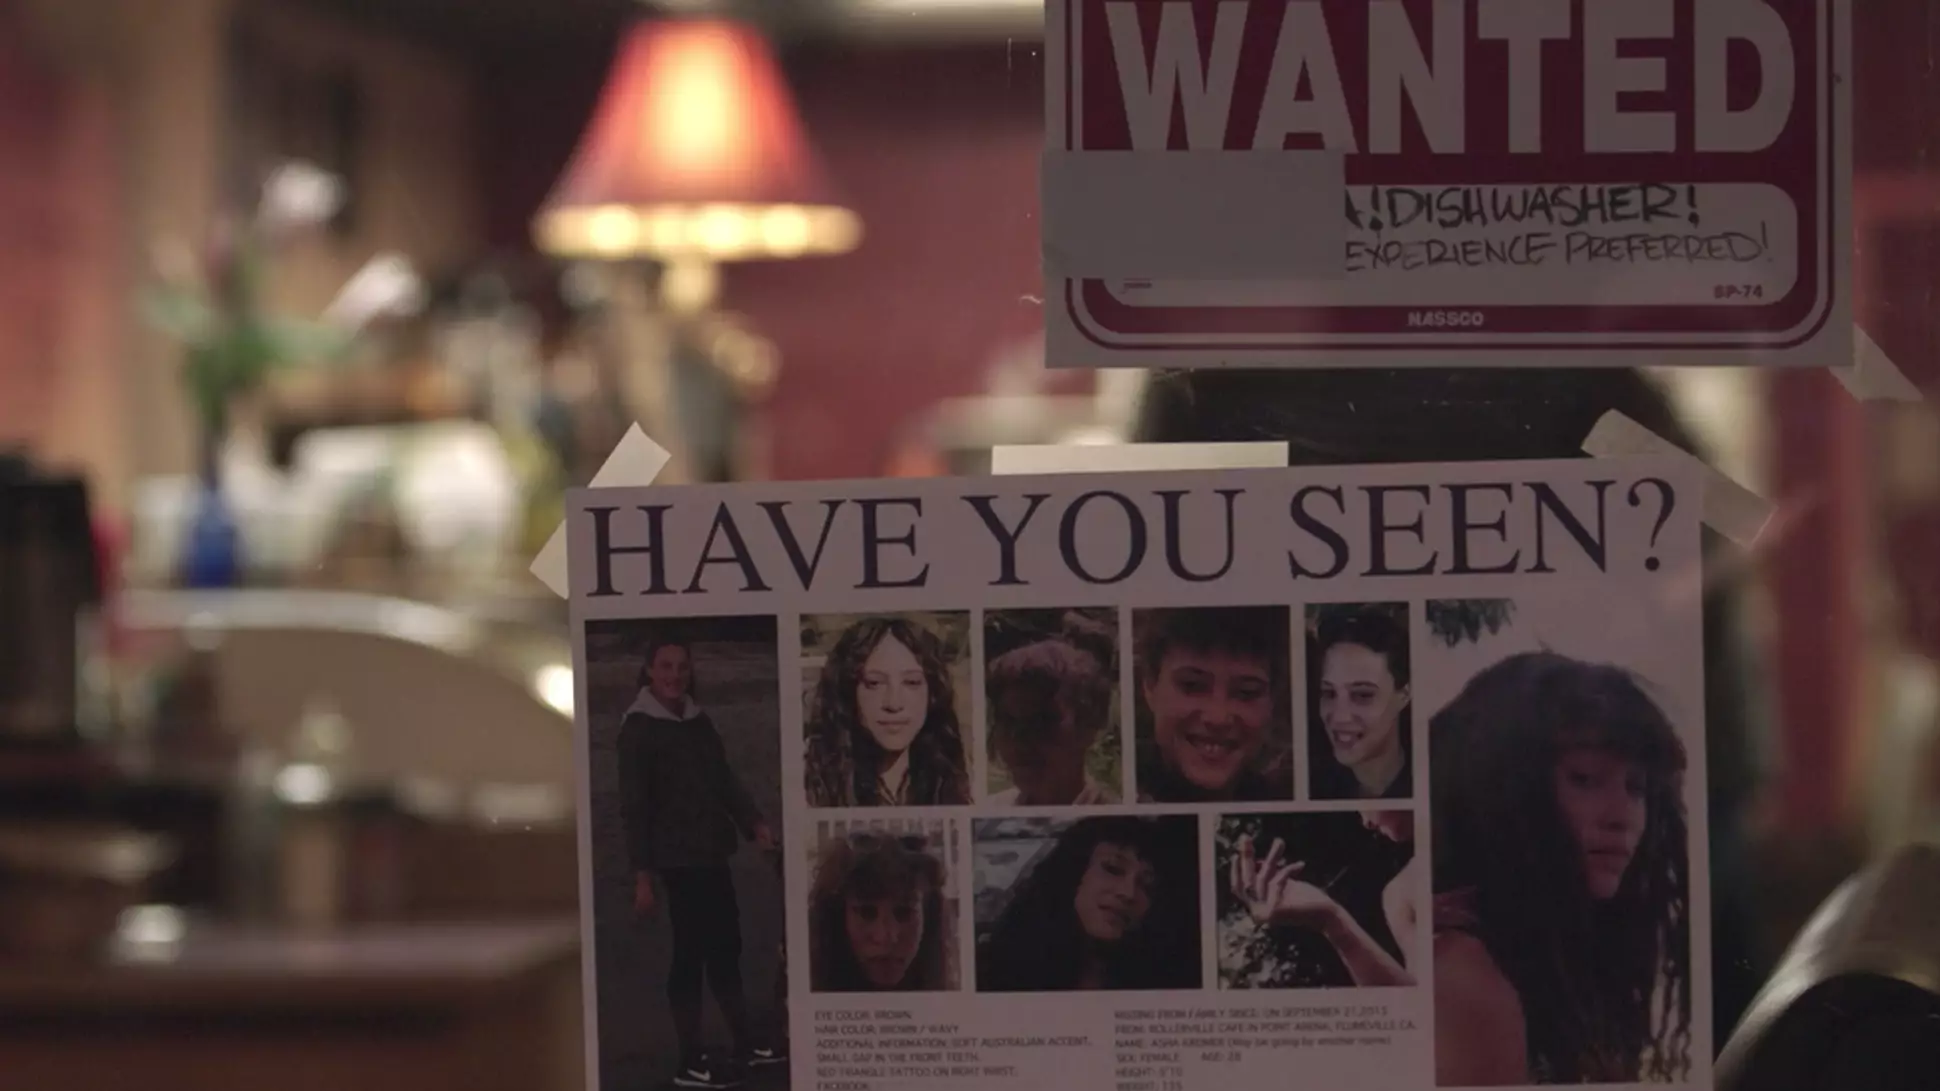 New Netflix Original 'Murder Mountain' Explores Missing People In Emerald Triangle